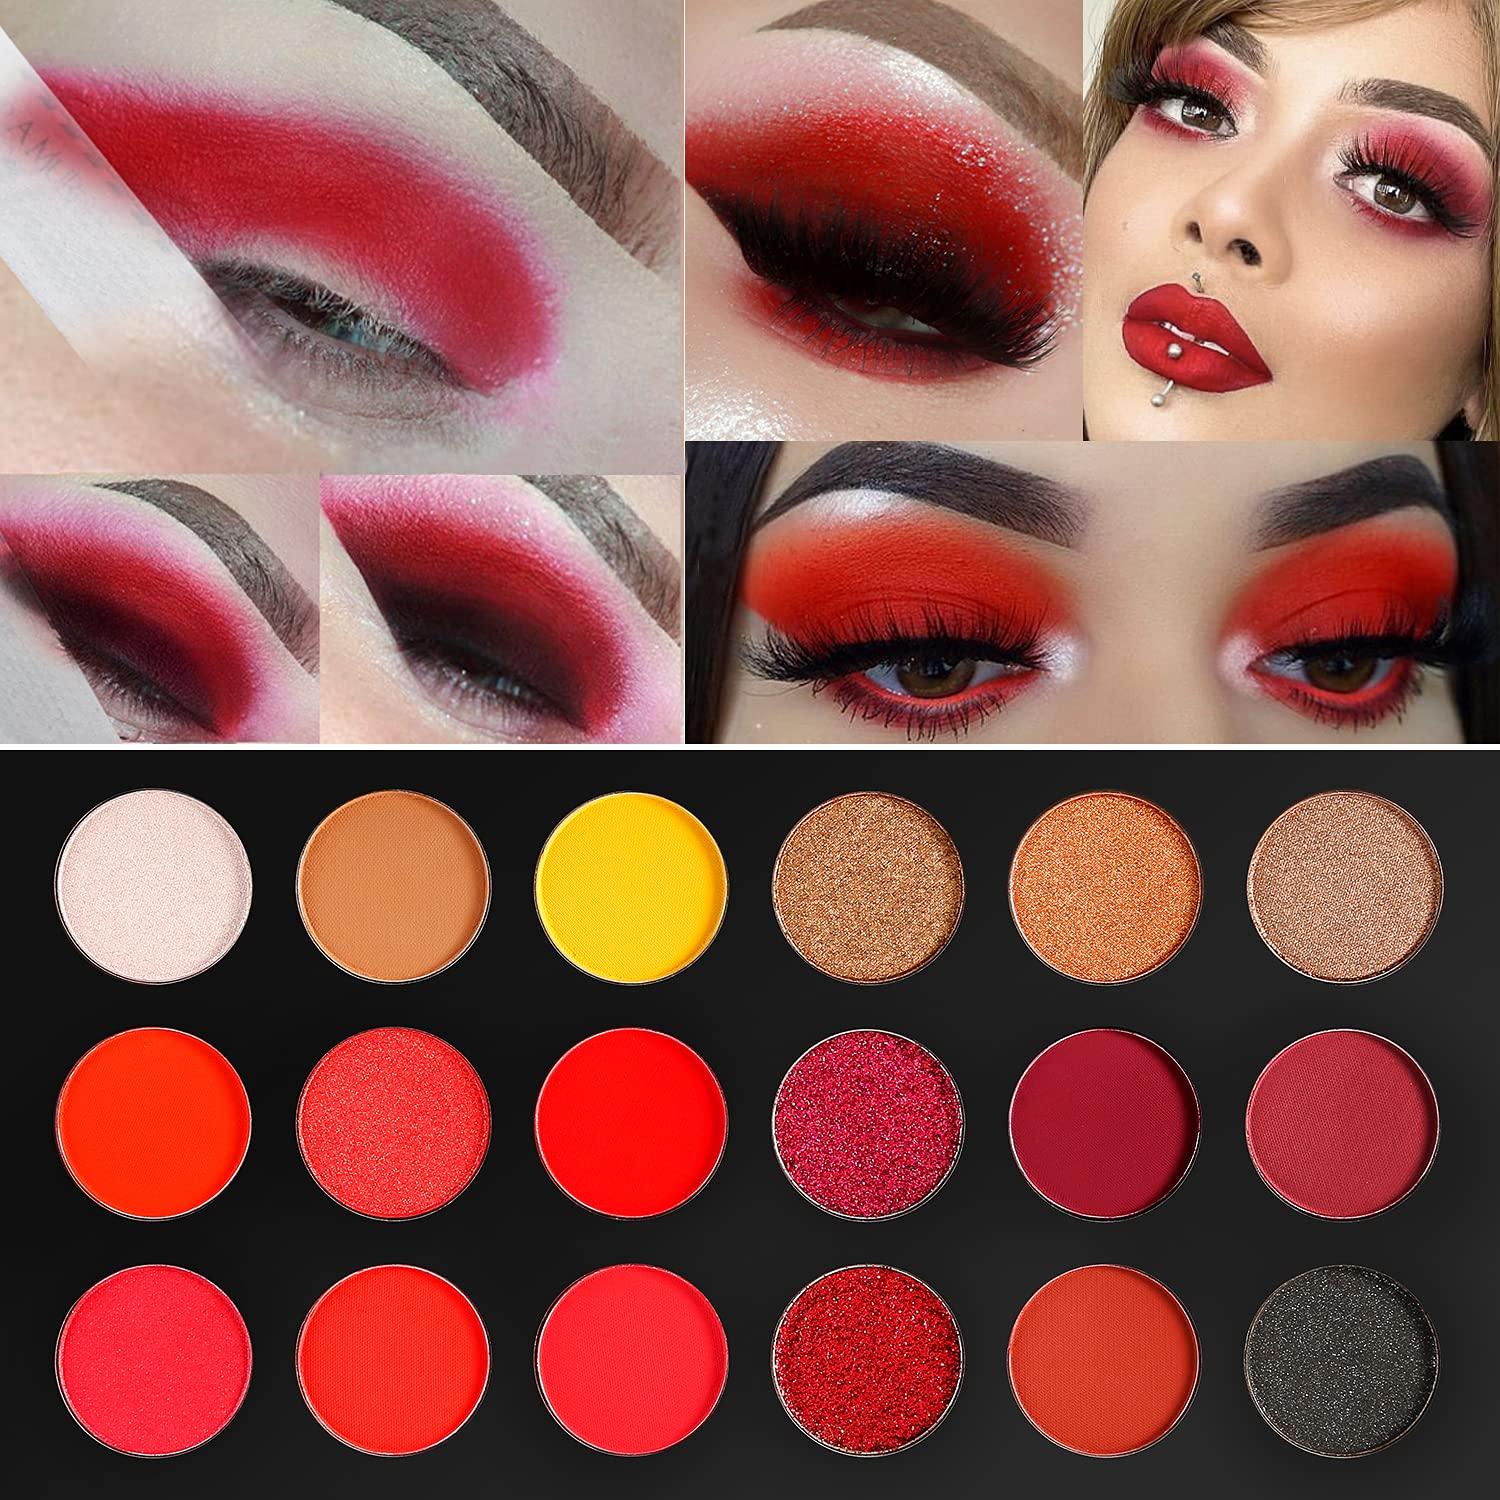 Red Eyeshadow Palette Highly Pigmented, AFFLANO Long Lasting True Red Eye Shadow Halloween Makeup Pallet 18 Color,Waterproof Matte Shimmer Brown Black Yellow Sunset Fall Cruelty Free red eye shadow -